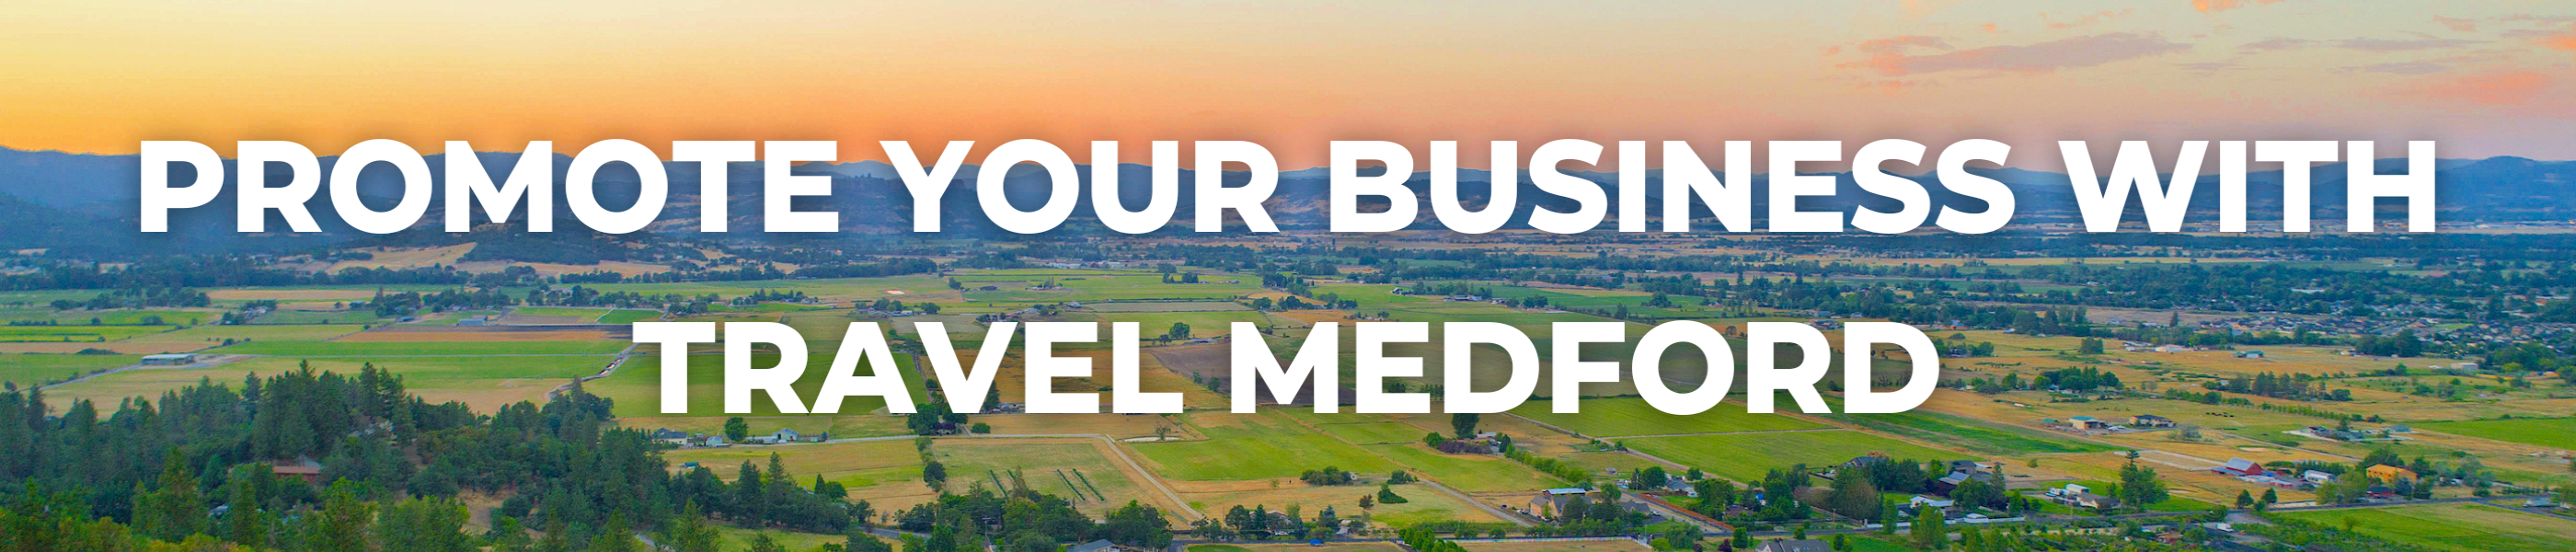 Promote Your Business with Travel Medford